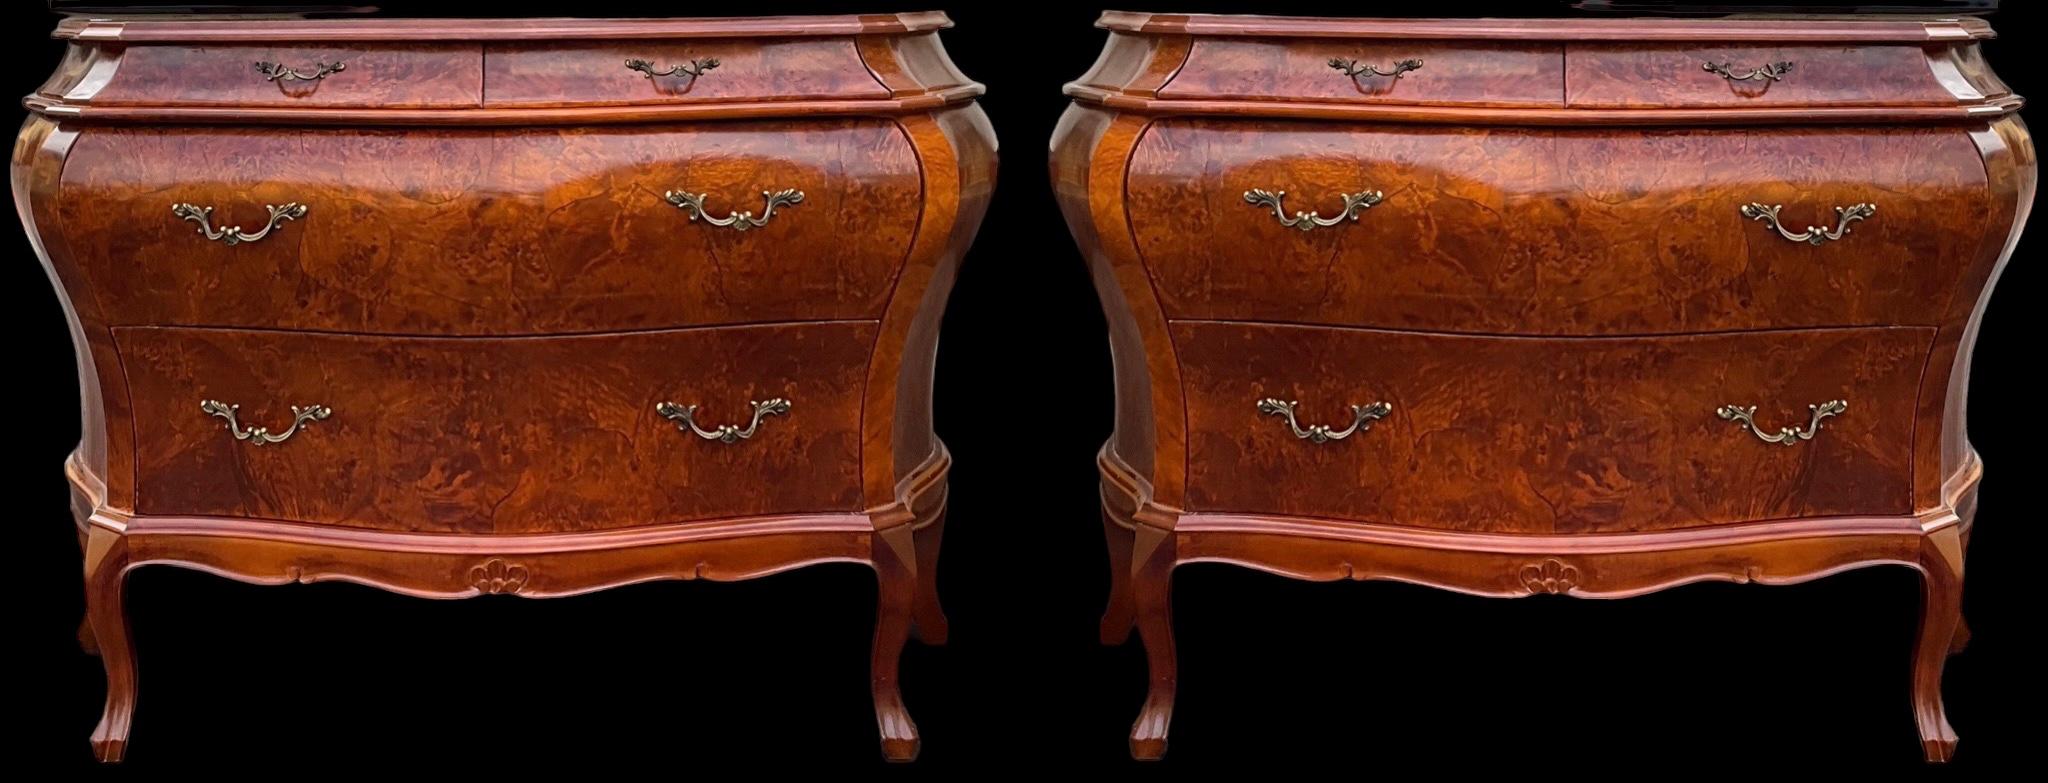 Louis XIV 1970s French Style Italian Burlwood And Brass Commodes / Chest Of Drawers - Pair For Sale